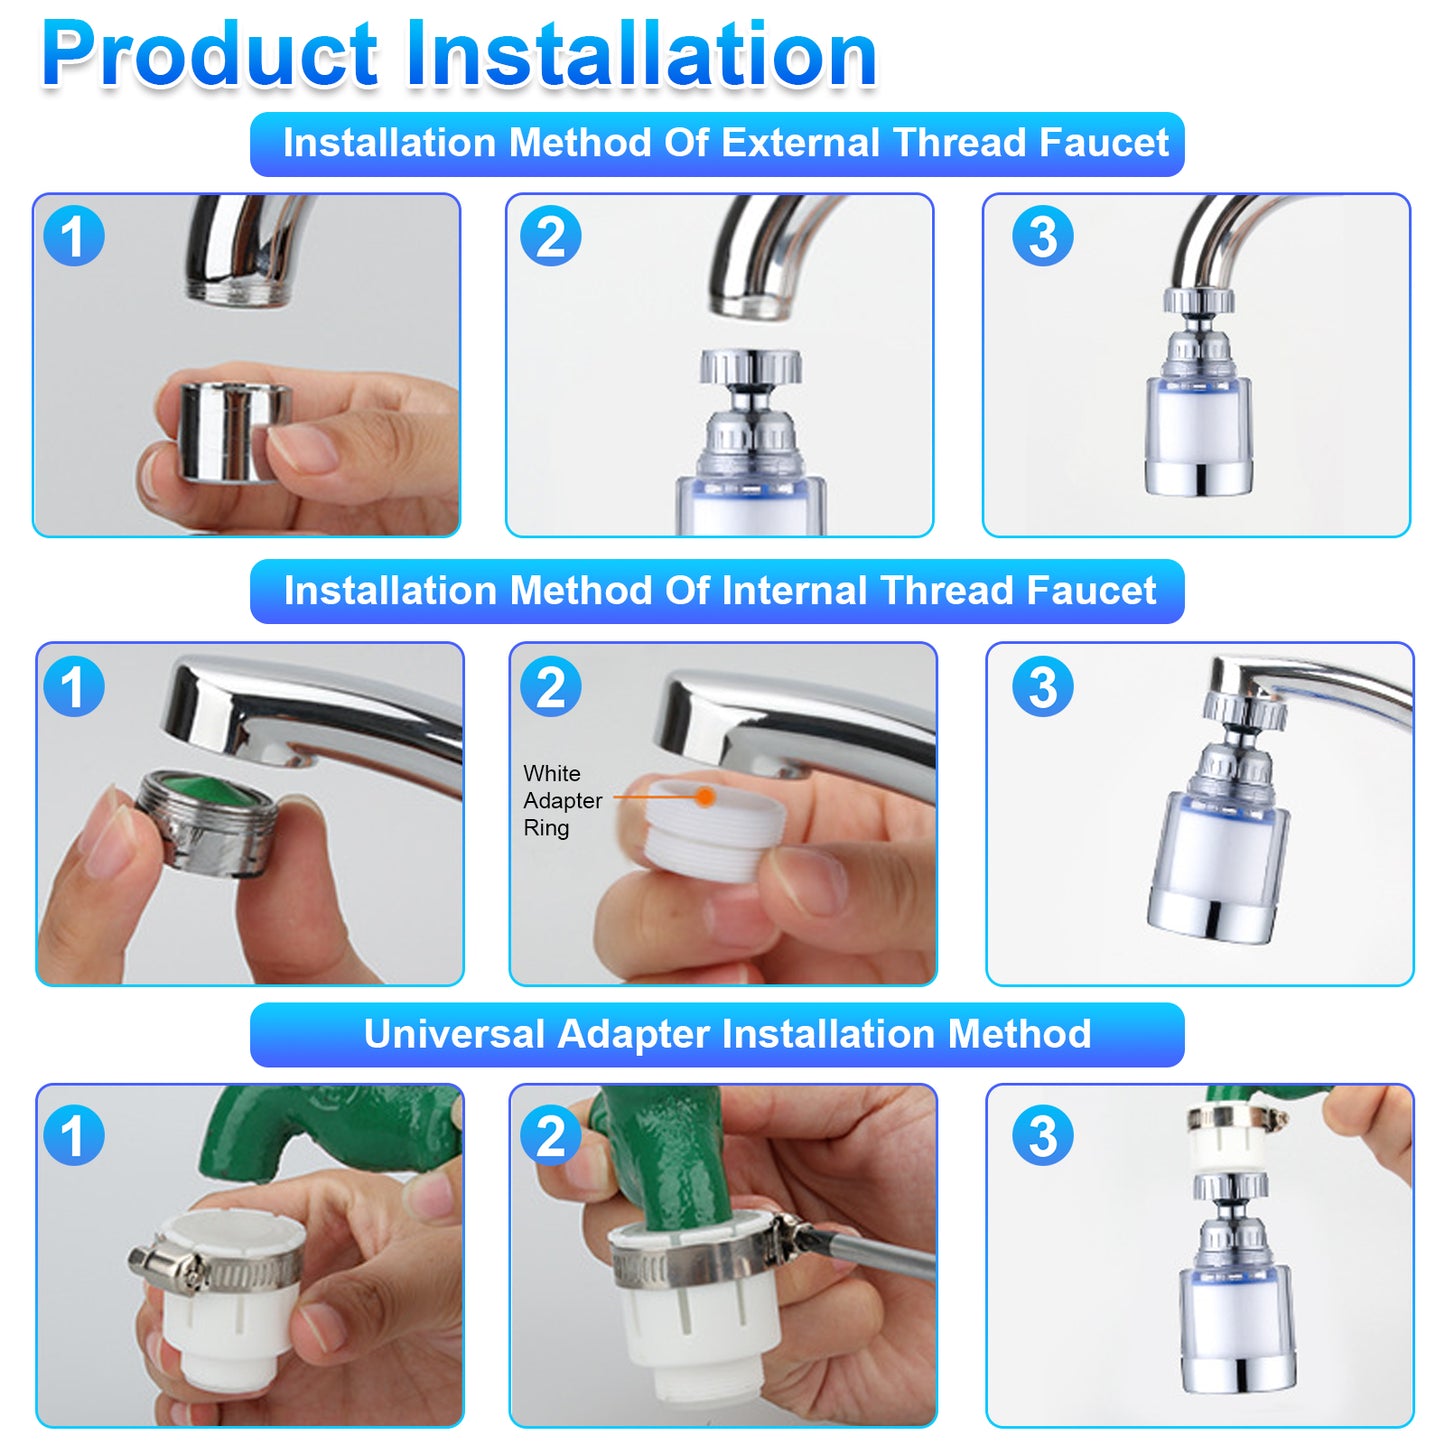 1 Faucet Water Filter and 5 Filter Cartridges - 360° rotatable anti-splash head,Water Filter Set for Hard Water Bath Filtration Purifier,for Kitchen Bathroom Washbasin Sink